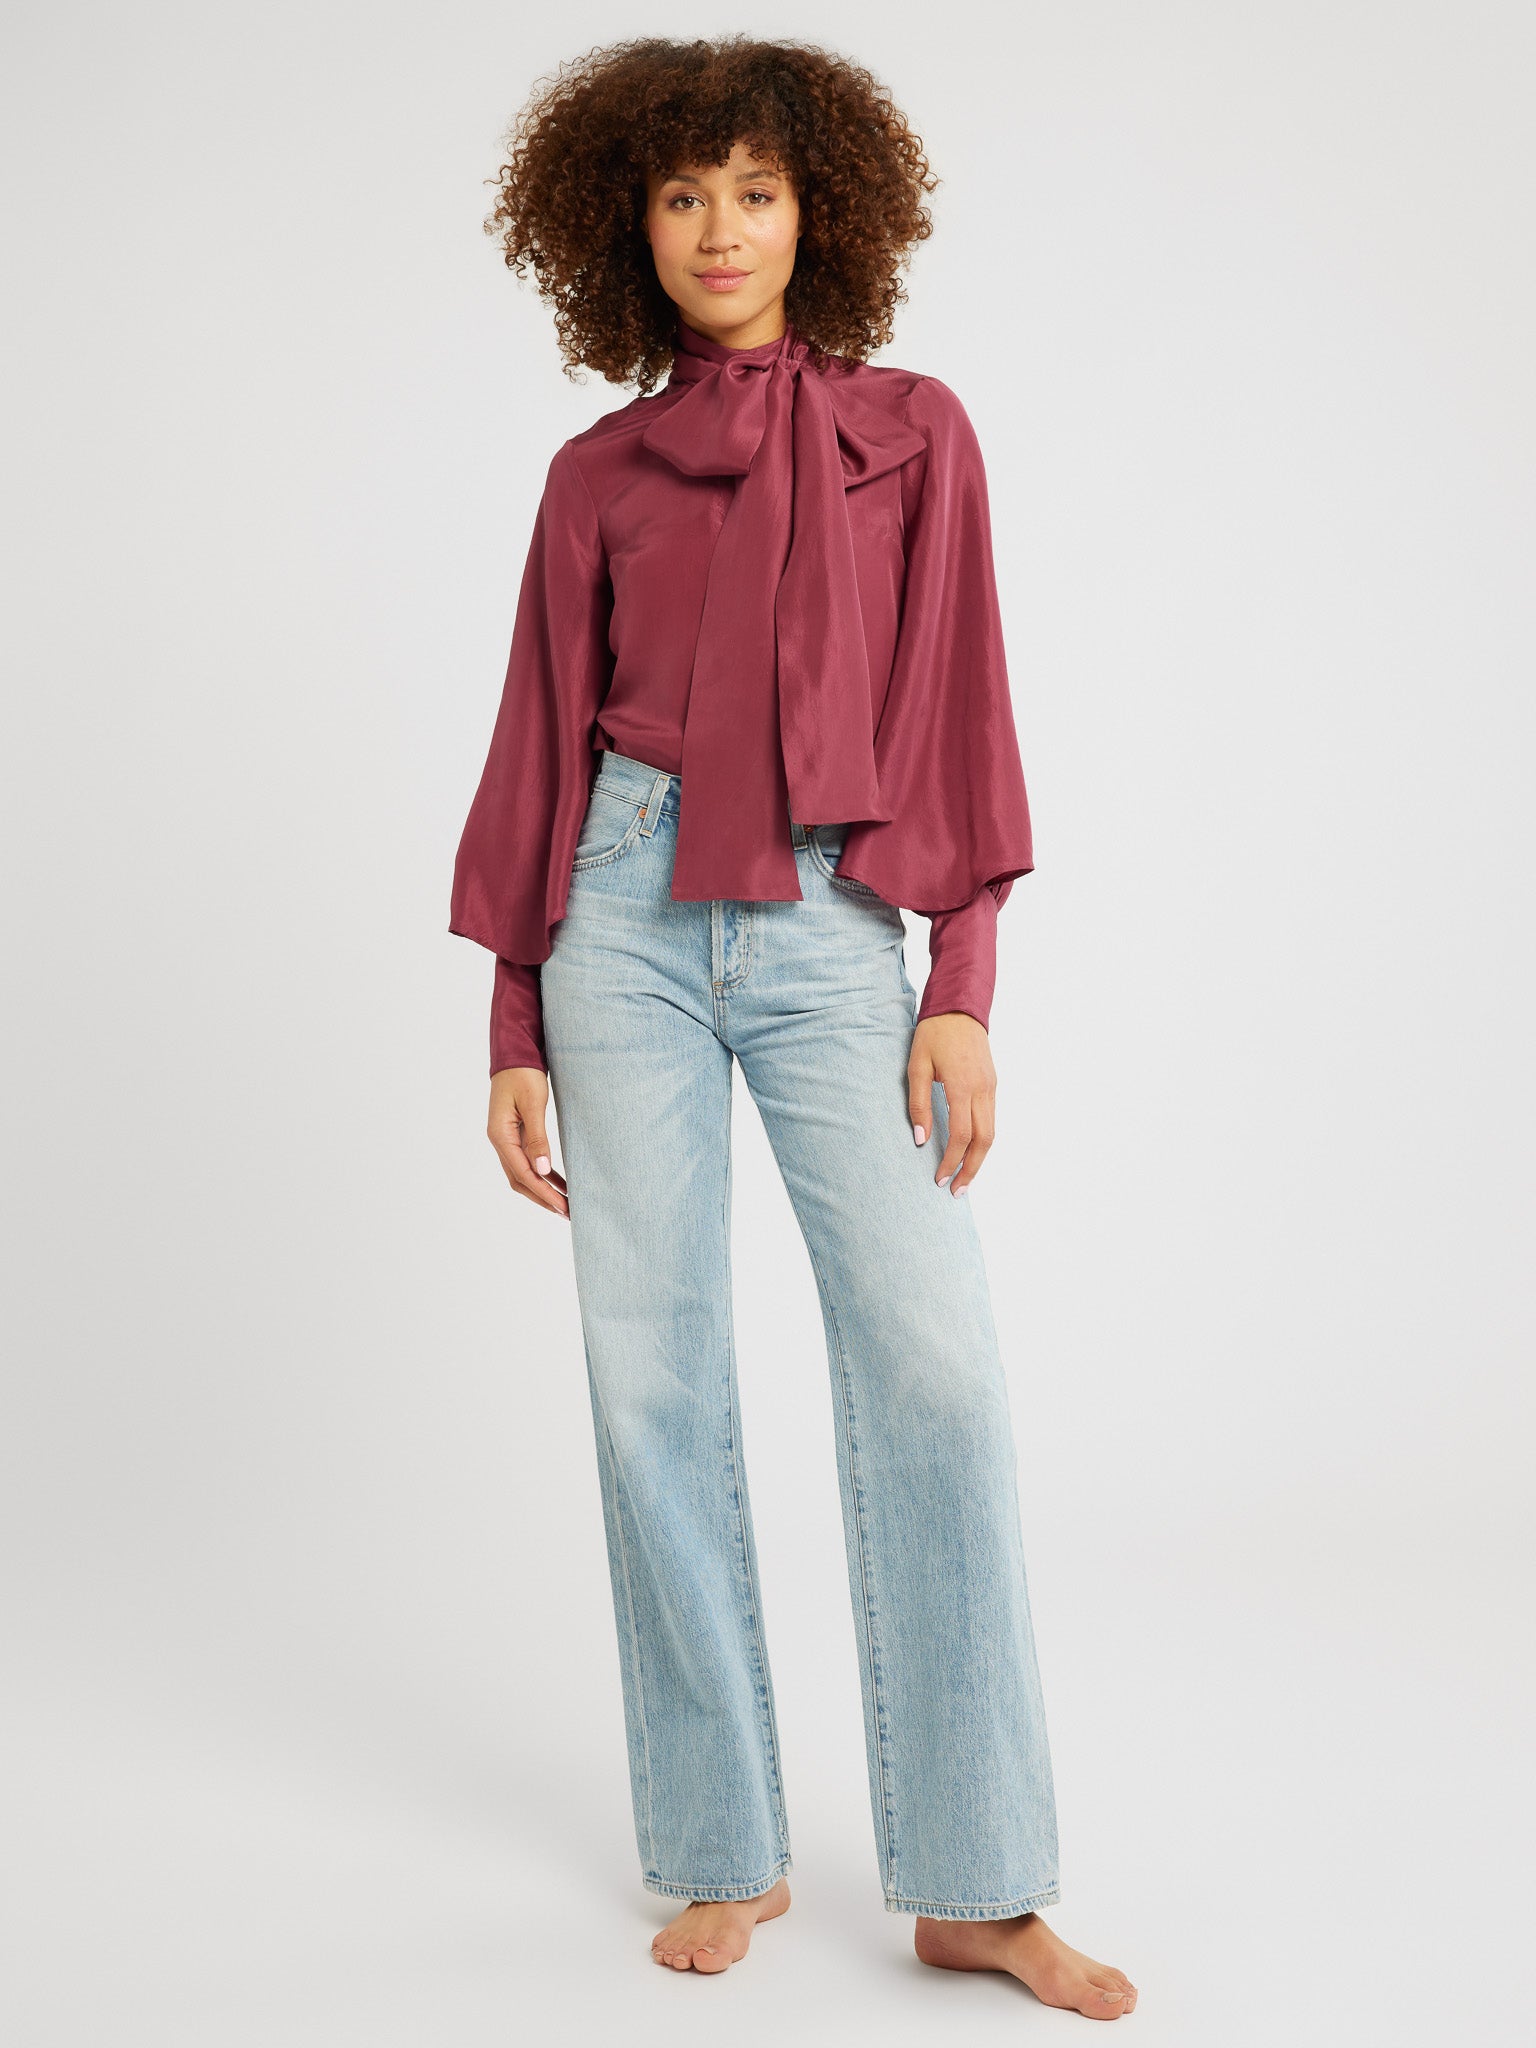 MILLE Clothing Gigi Top in Plum Washed Silk